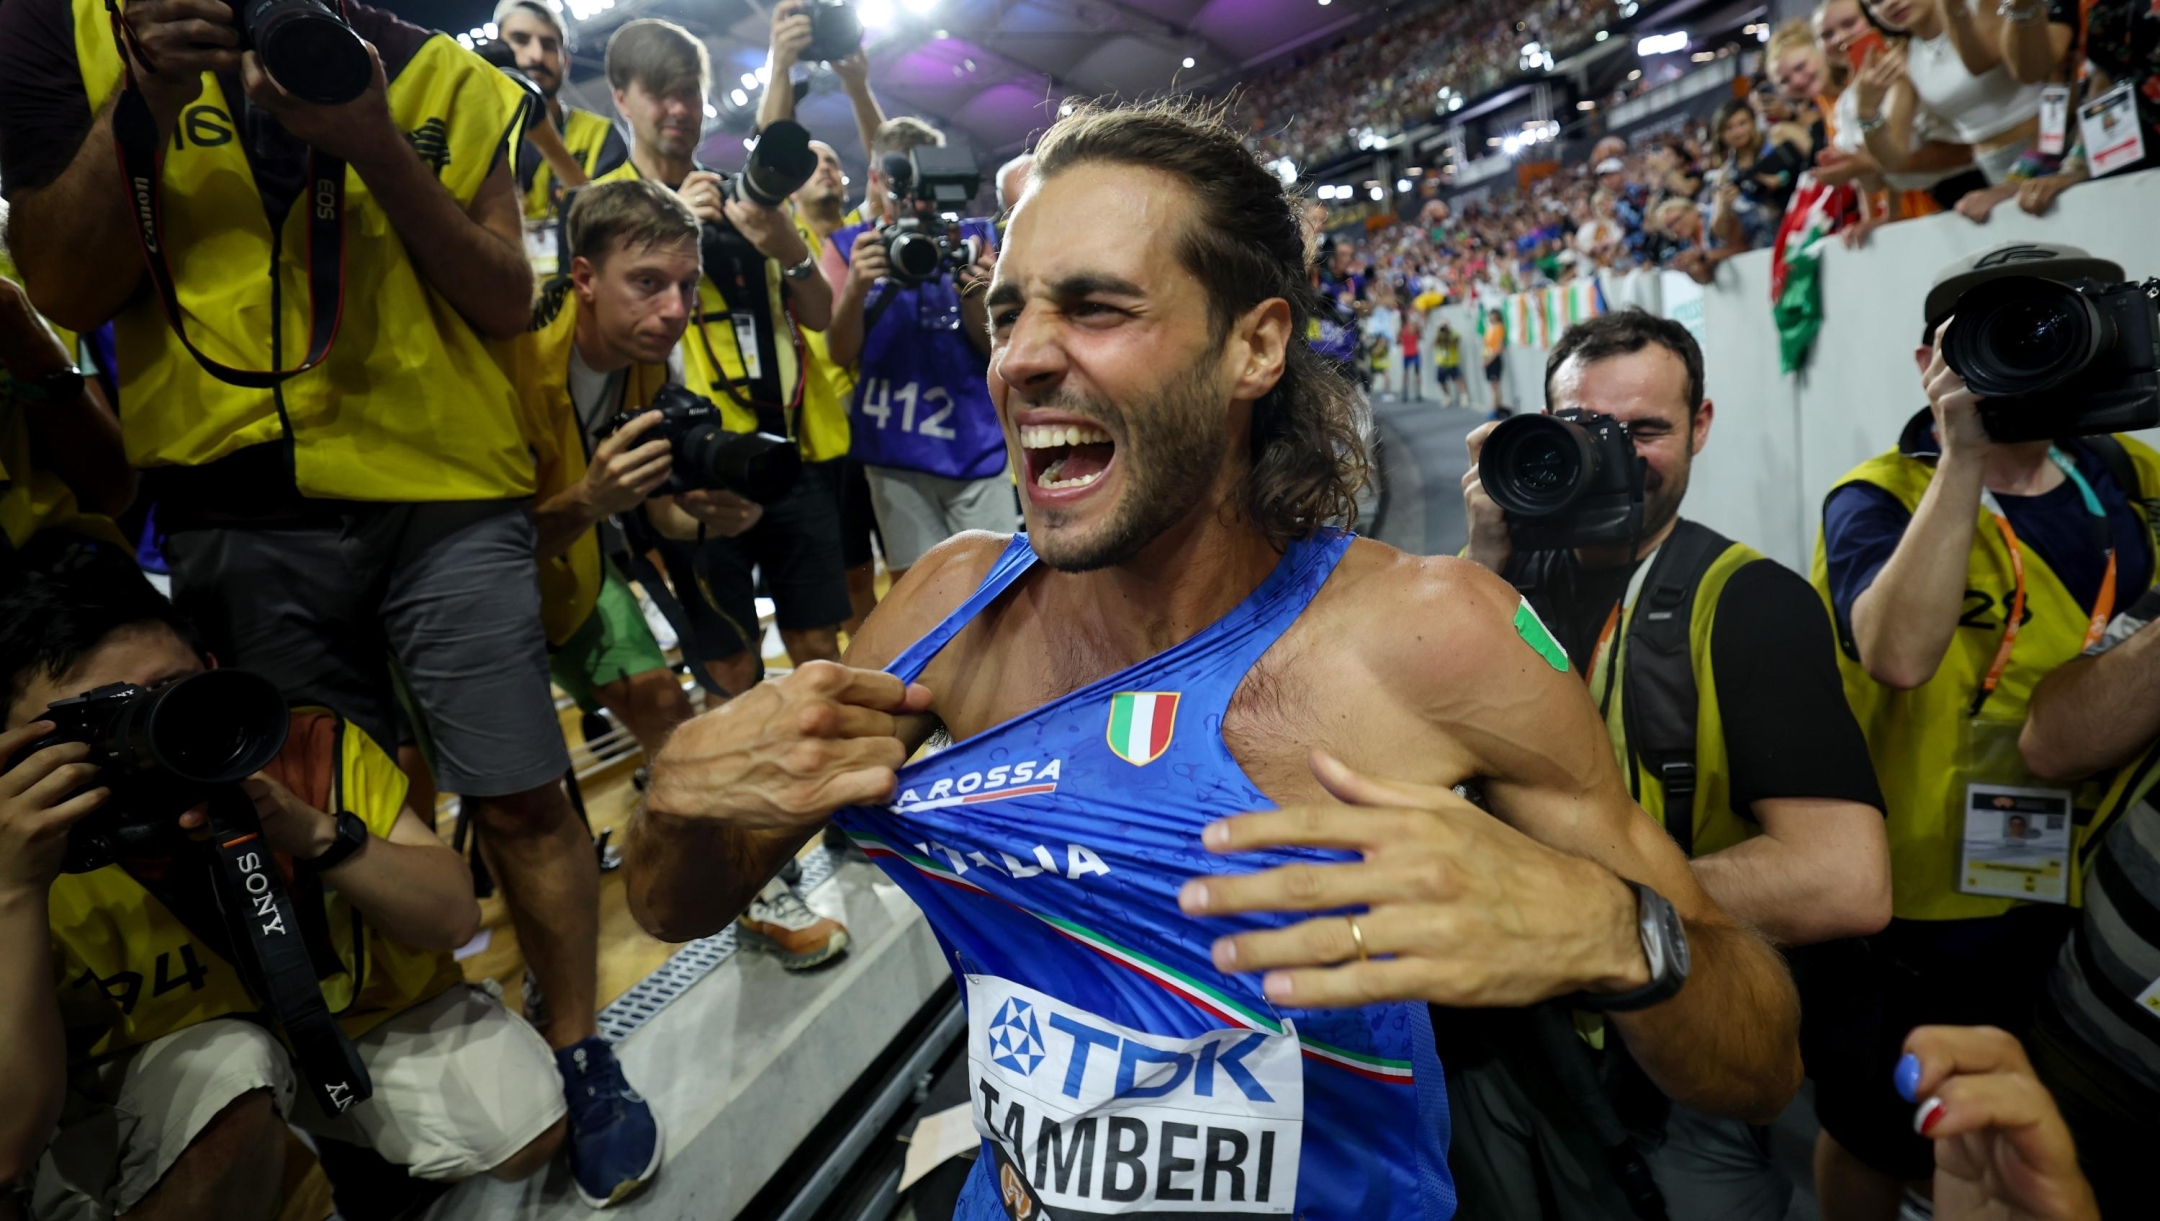 BUDAPEST, HUNGARY - AUGUST 22: Gold medalist Gianmarco Tamberi of Team Italy reacts after winning the Men's High Jump Final during day four of the World Athletics Championships Budapest 2023 at National Athletics Centre on August 22, 2023 in Budapest, Hungary. (Photo by Steph Chambers/Getty Images) *** BESTPIX ***